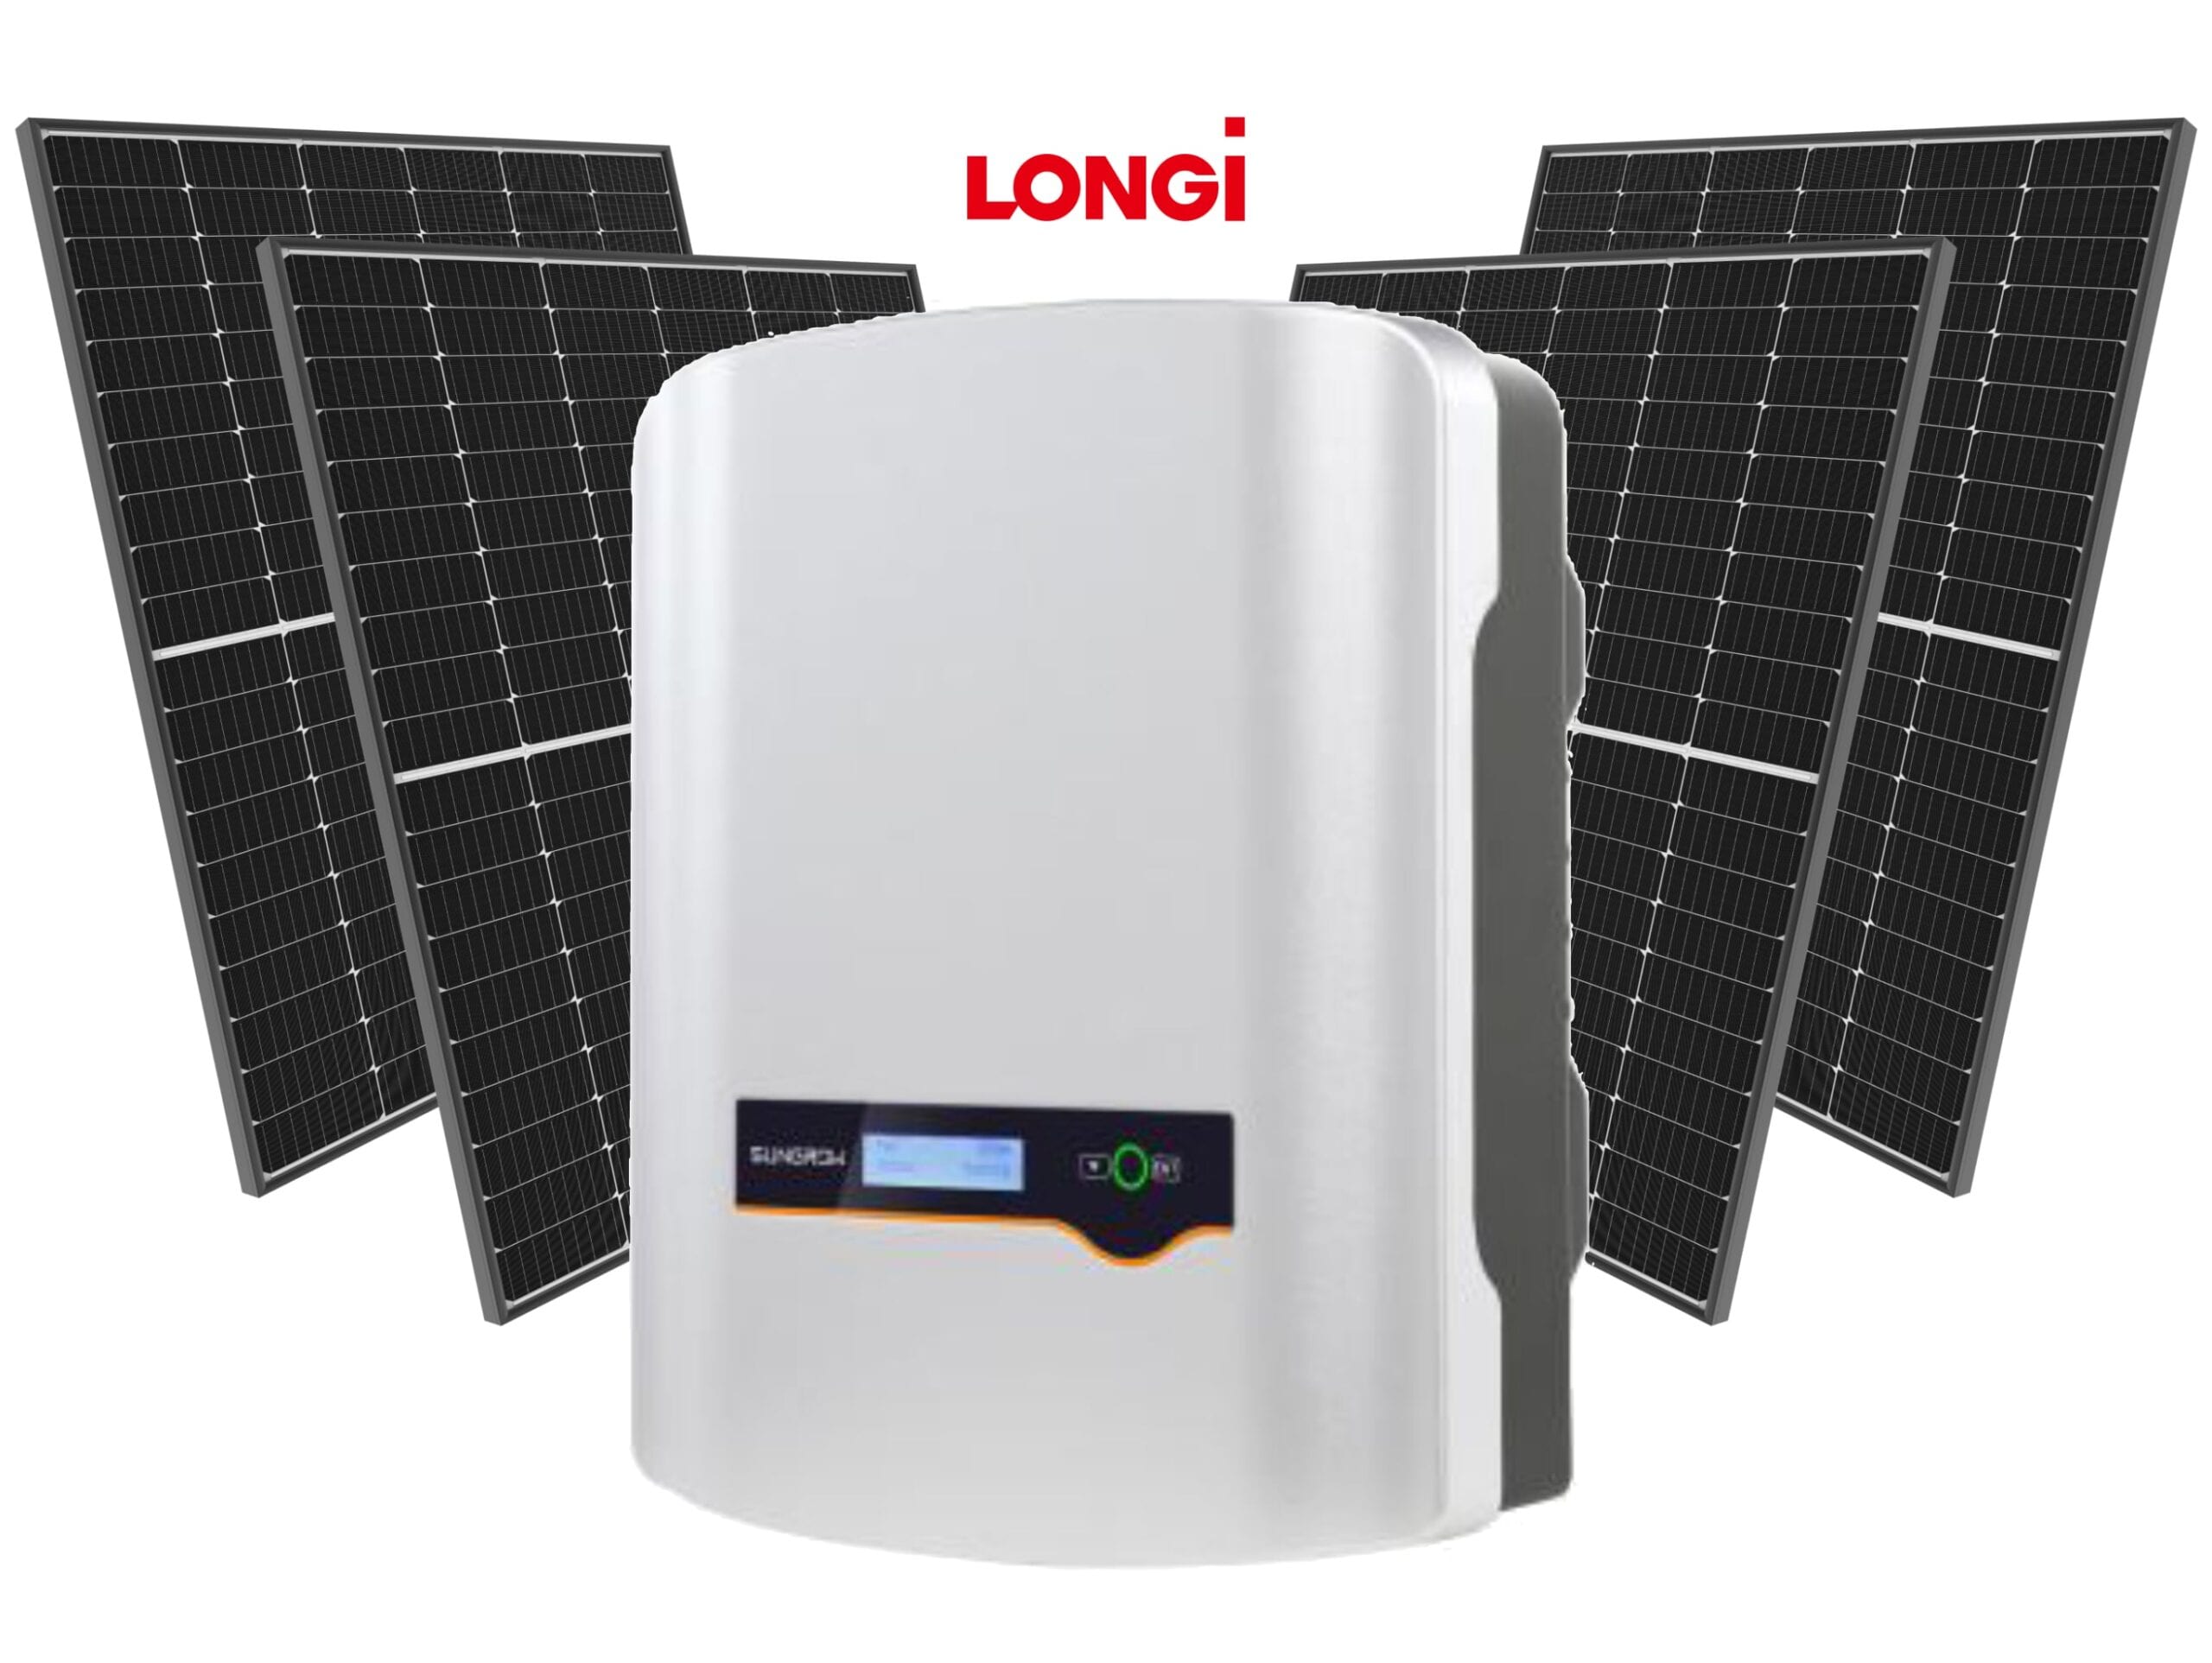 Solar Package